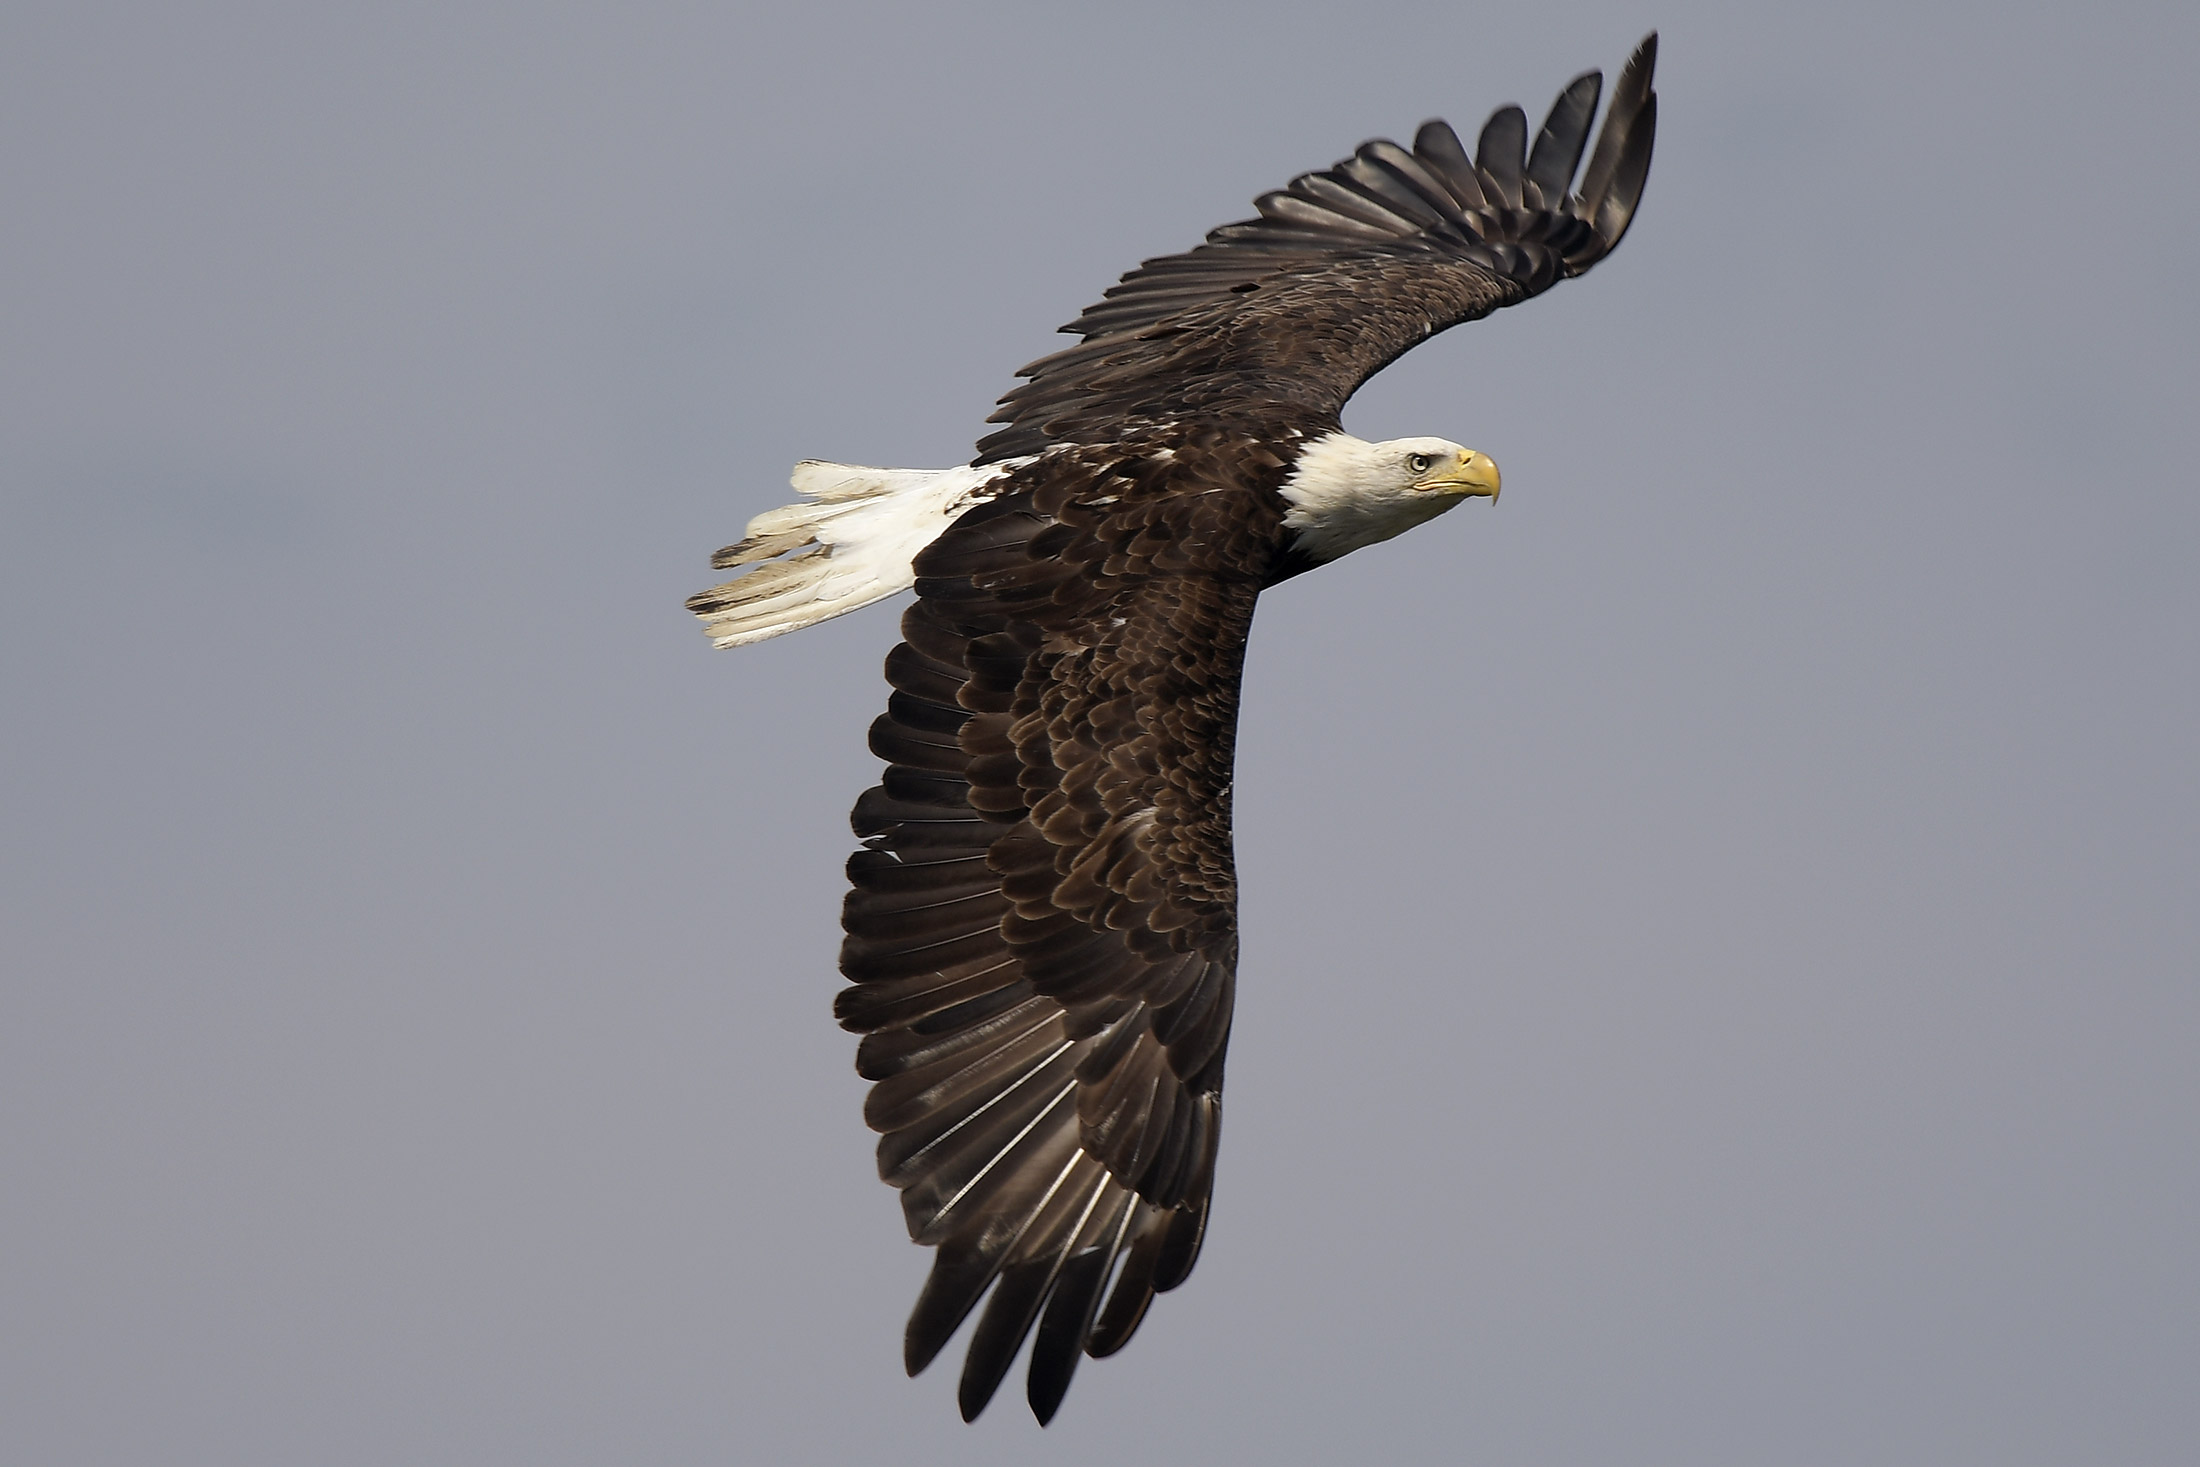 a bald eagle soaring with wings spread out